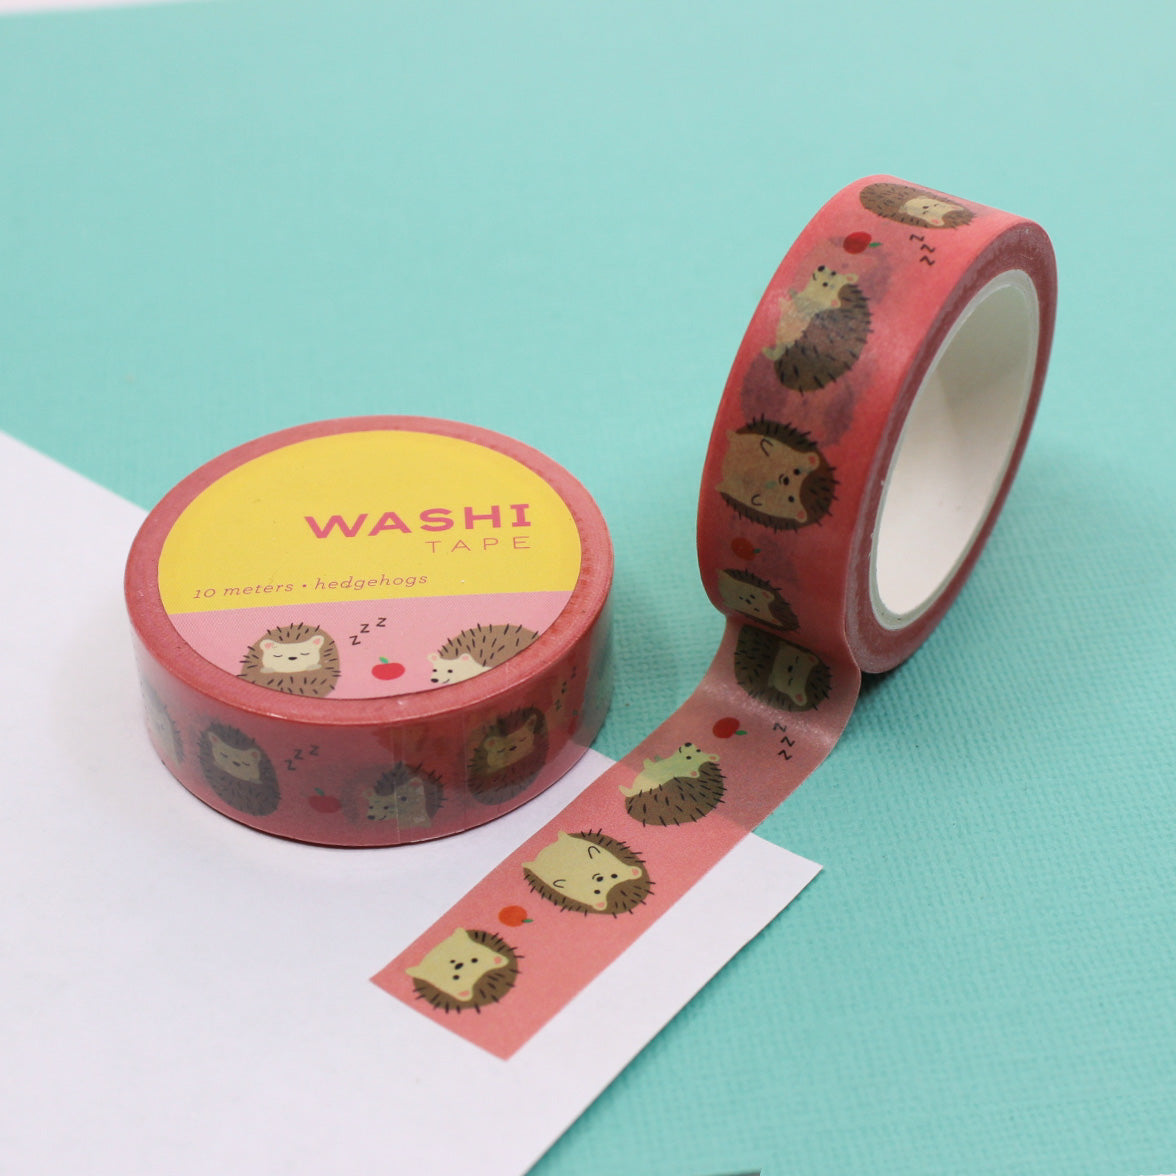 Cute Hedgehog Washi Tape features adorable hedgehog designs, adding a charming and playful element to your crafts, scrapbooking, and more. This tape is from Girl of All Work and sold at BBB Supplies Craft Shop.